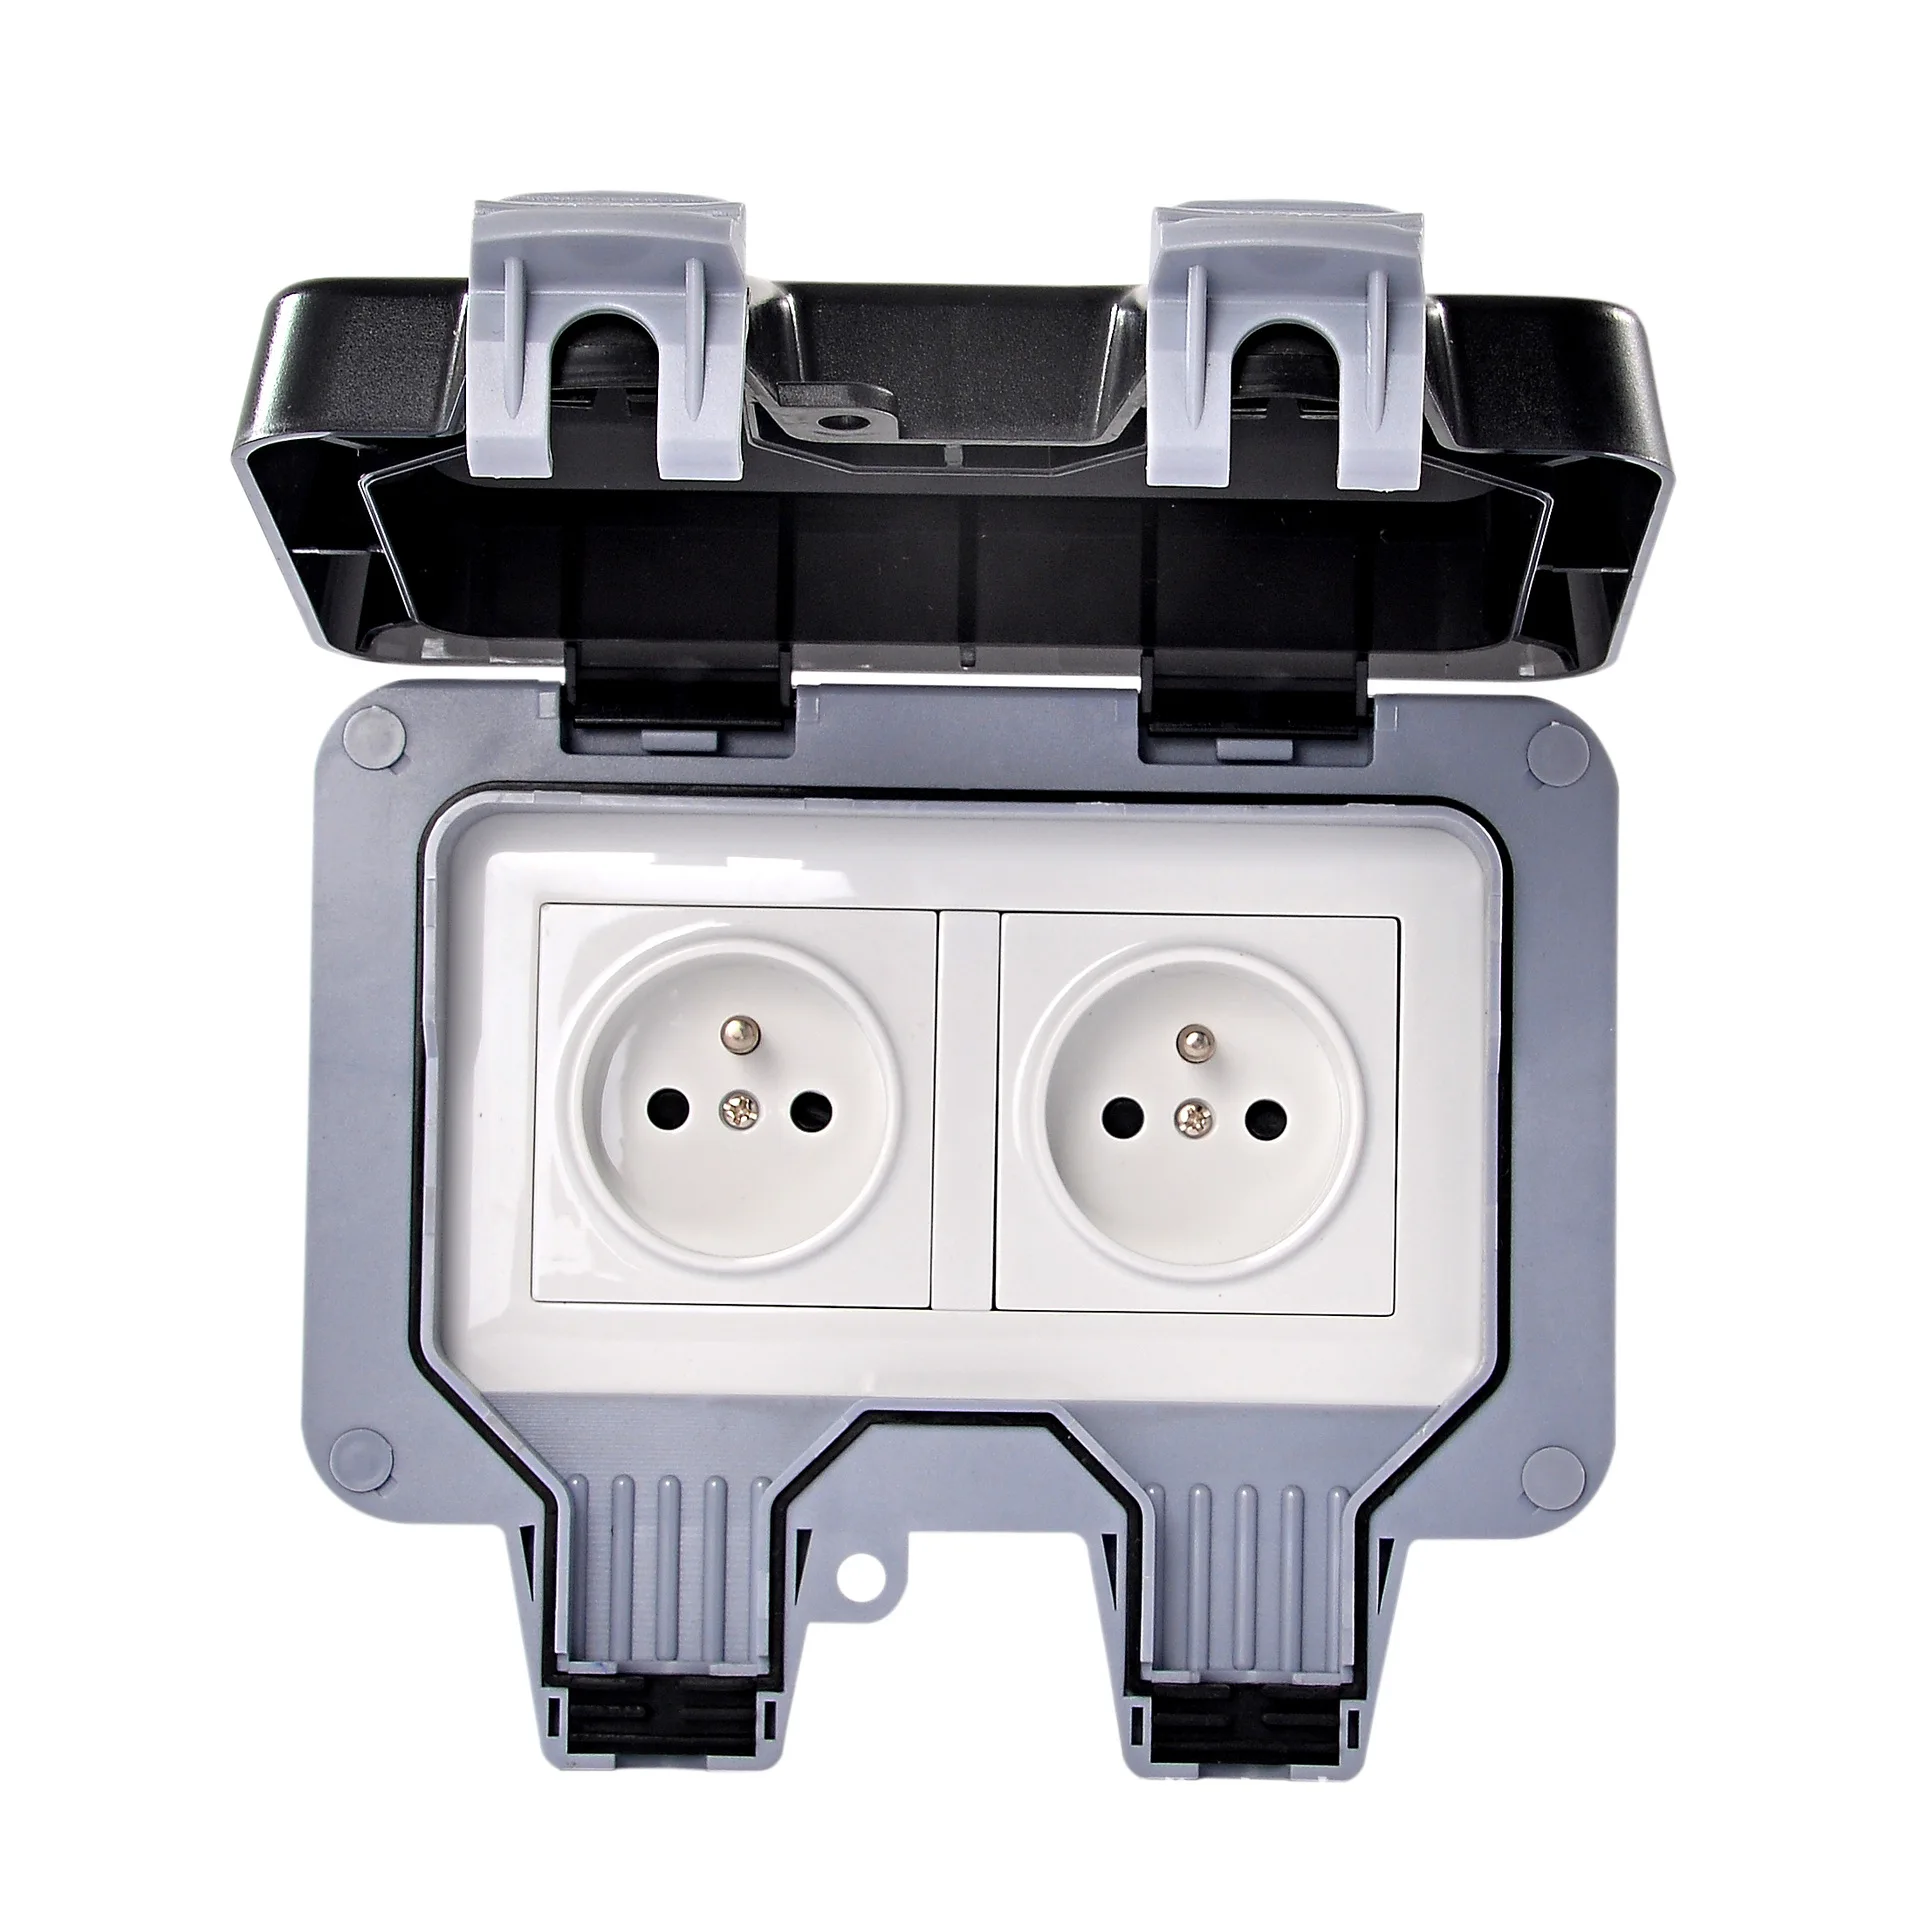 

IP66 Weatherproof Waterproof Outdoor Wall Power Socket 13A Double France Standard Electrical Outlet Grounded AC 110~250V